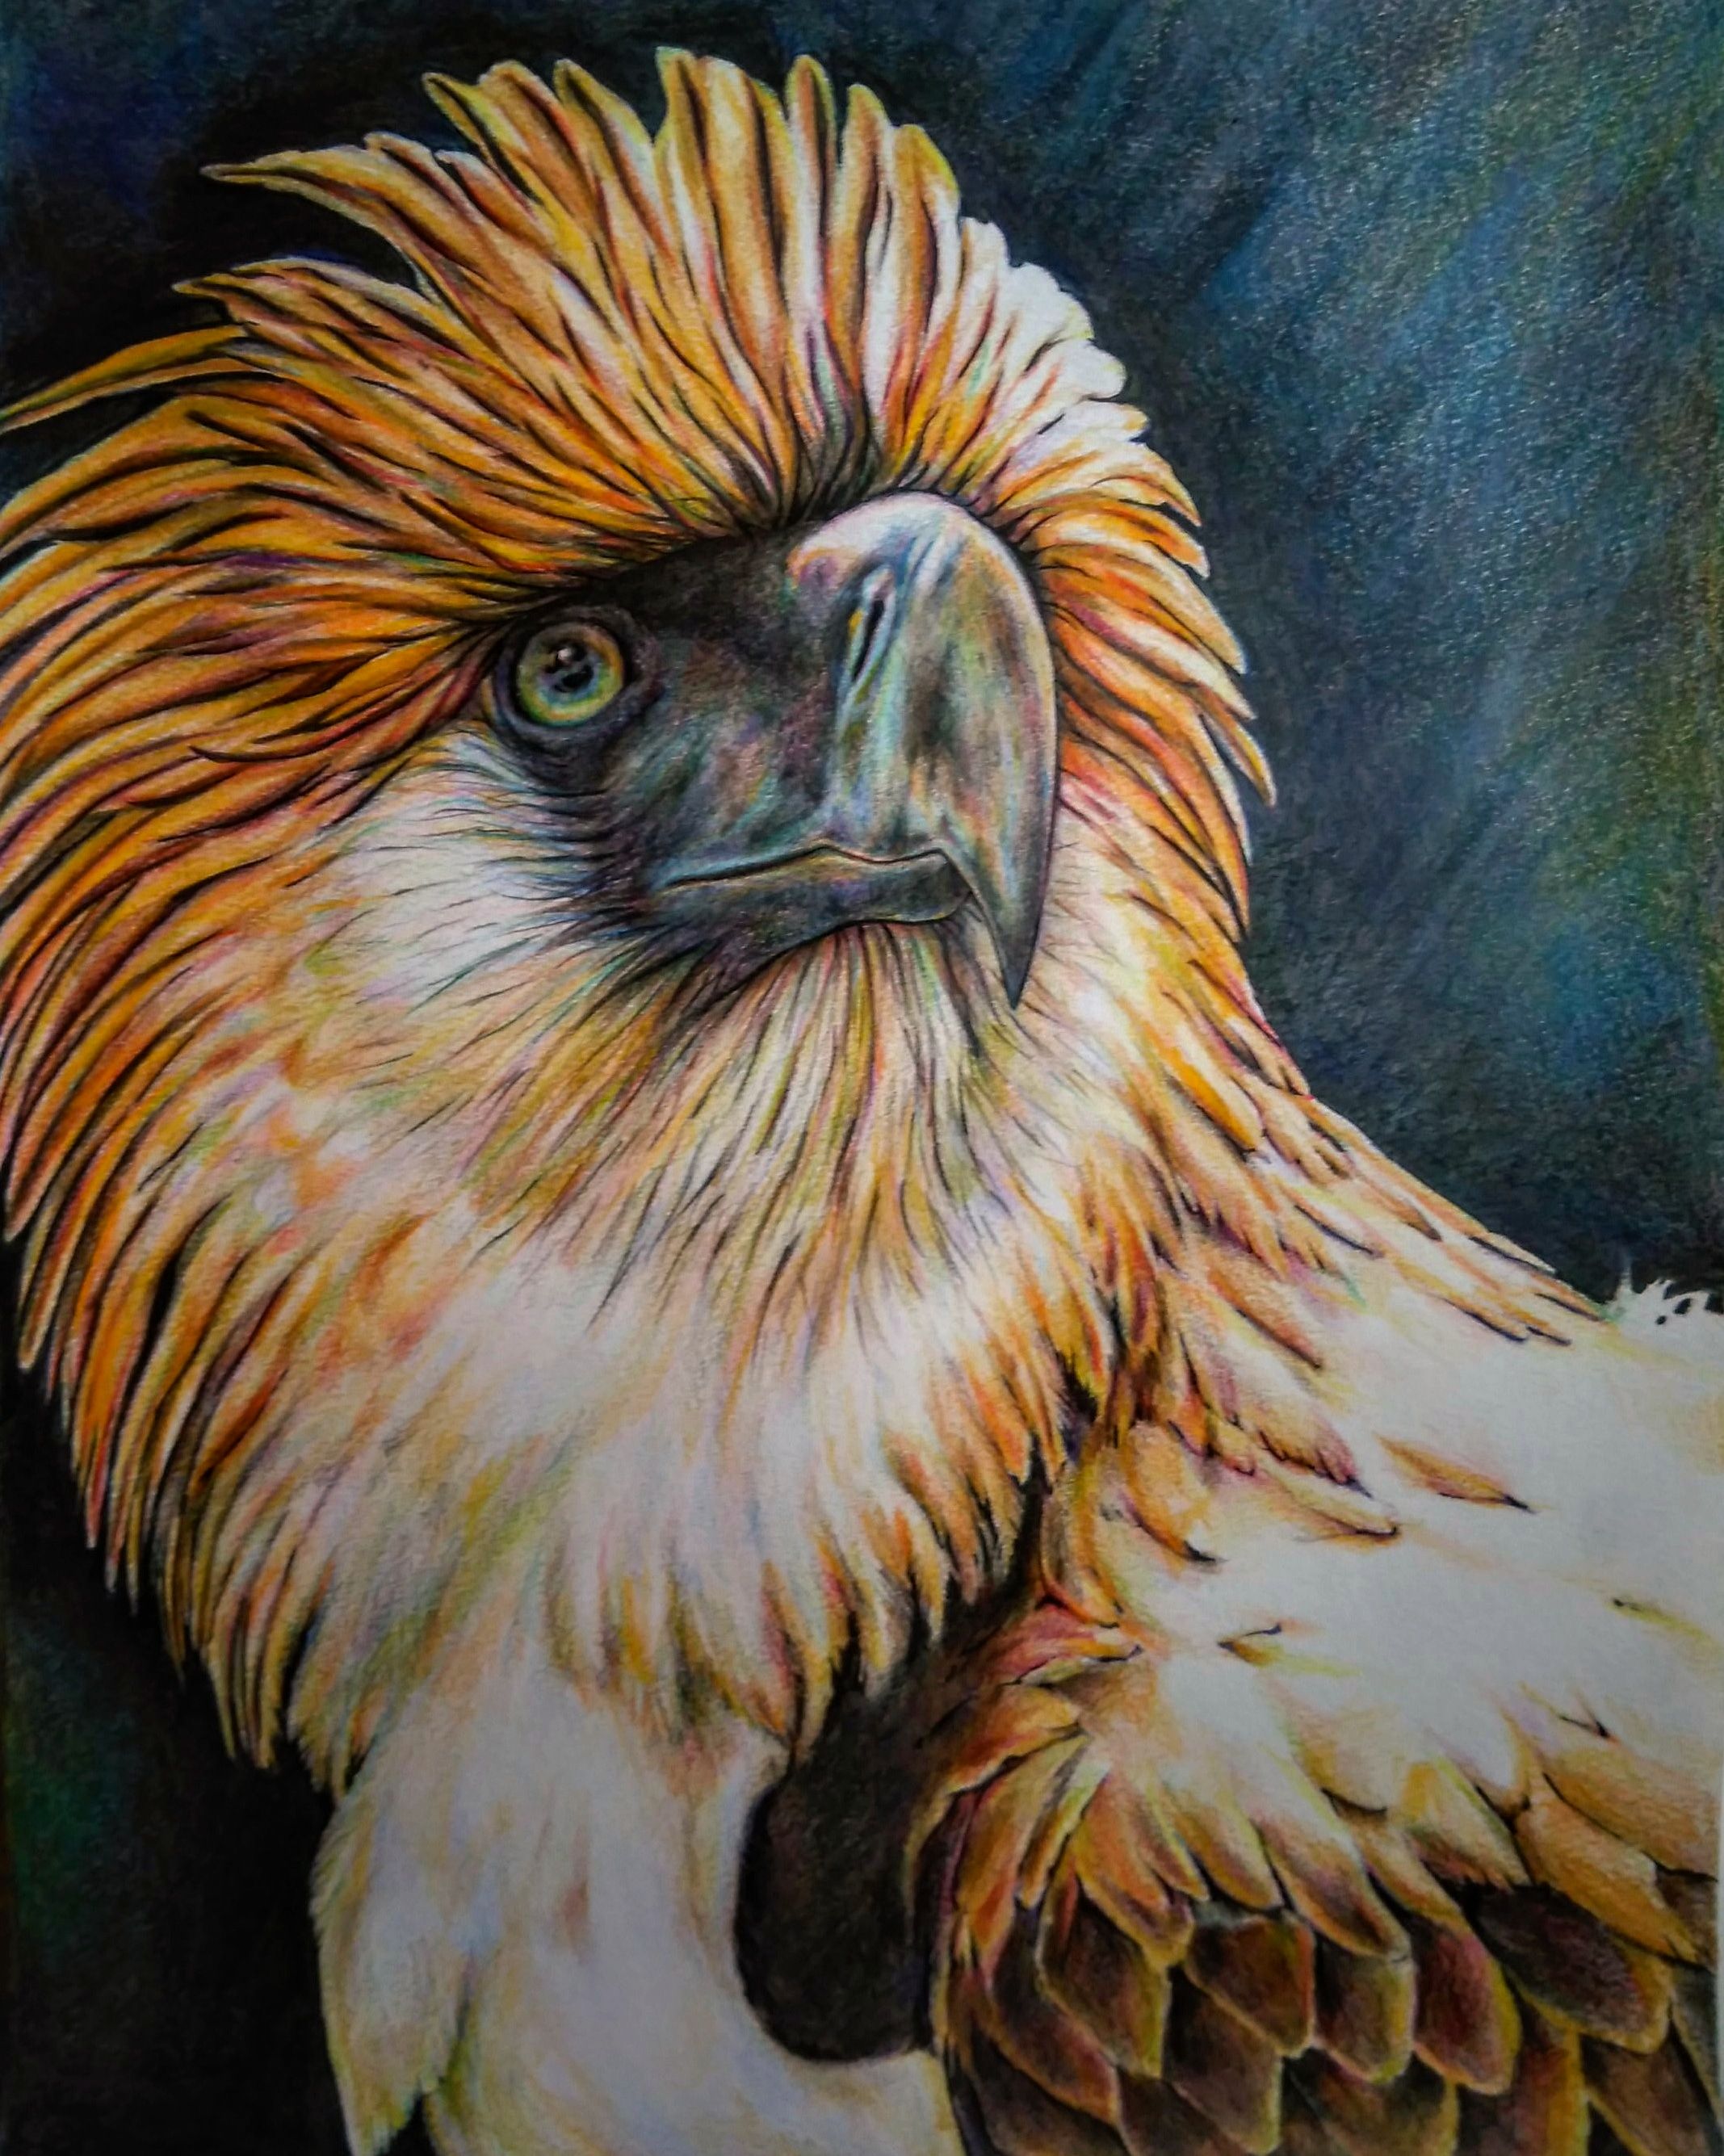 Jessica Matheney Fine Art - 8x10 bald eagle colored pencil drawing. Done on  Strathmore 400 series, 80lb paper, using fabercastell polychromos colored  pencils. #fabercastell #polychromos #strathmore #wildlife #pencilart  #wildlifeartist #drawing ...